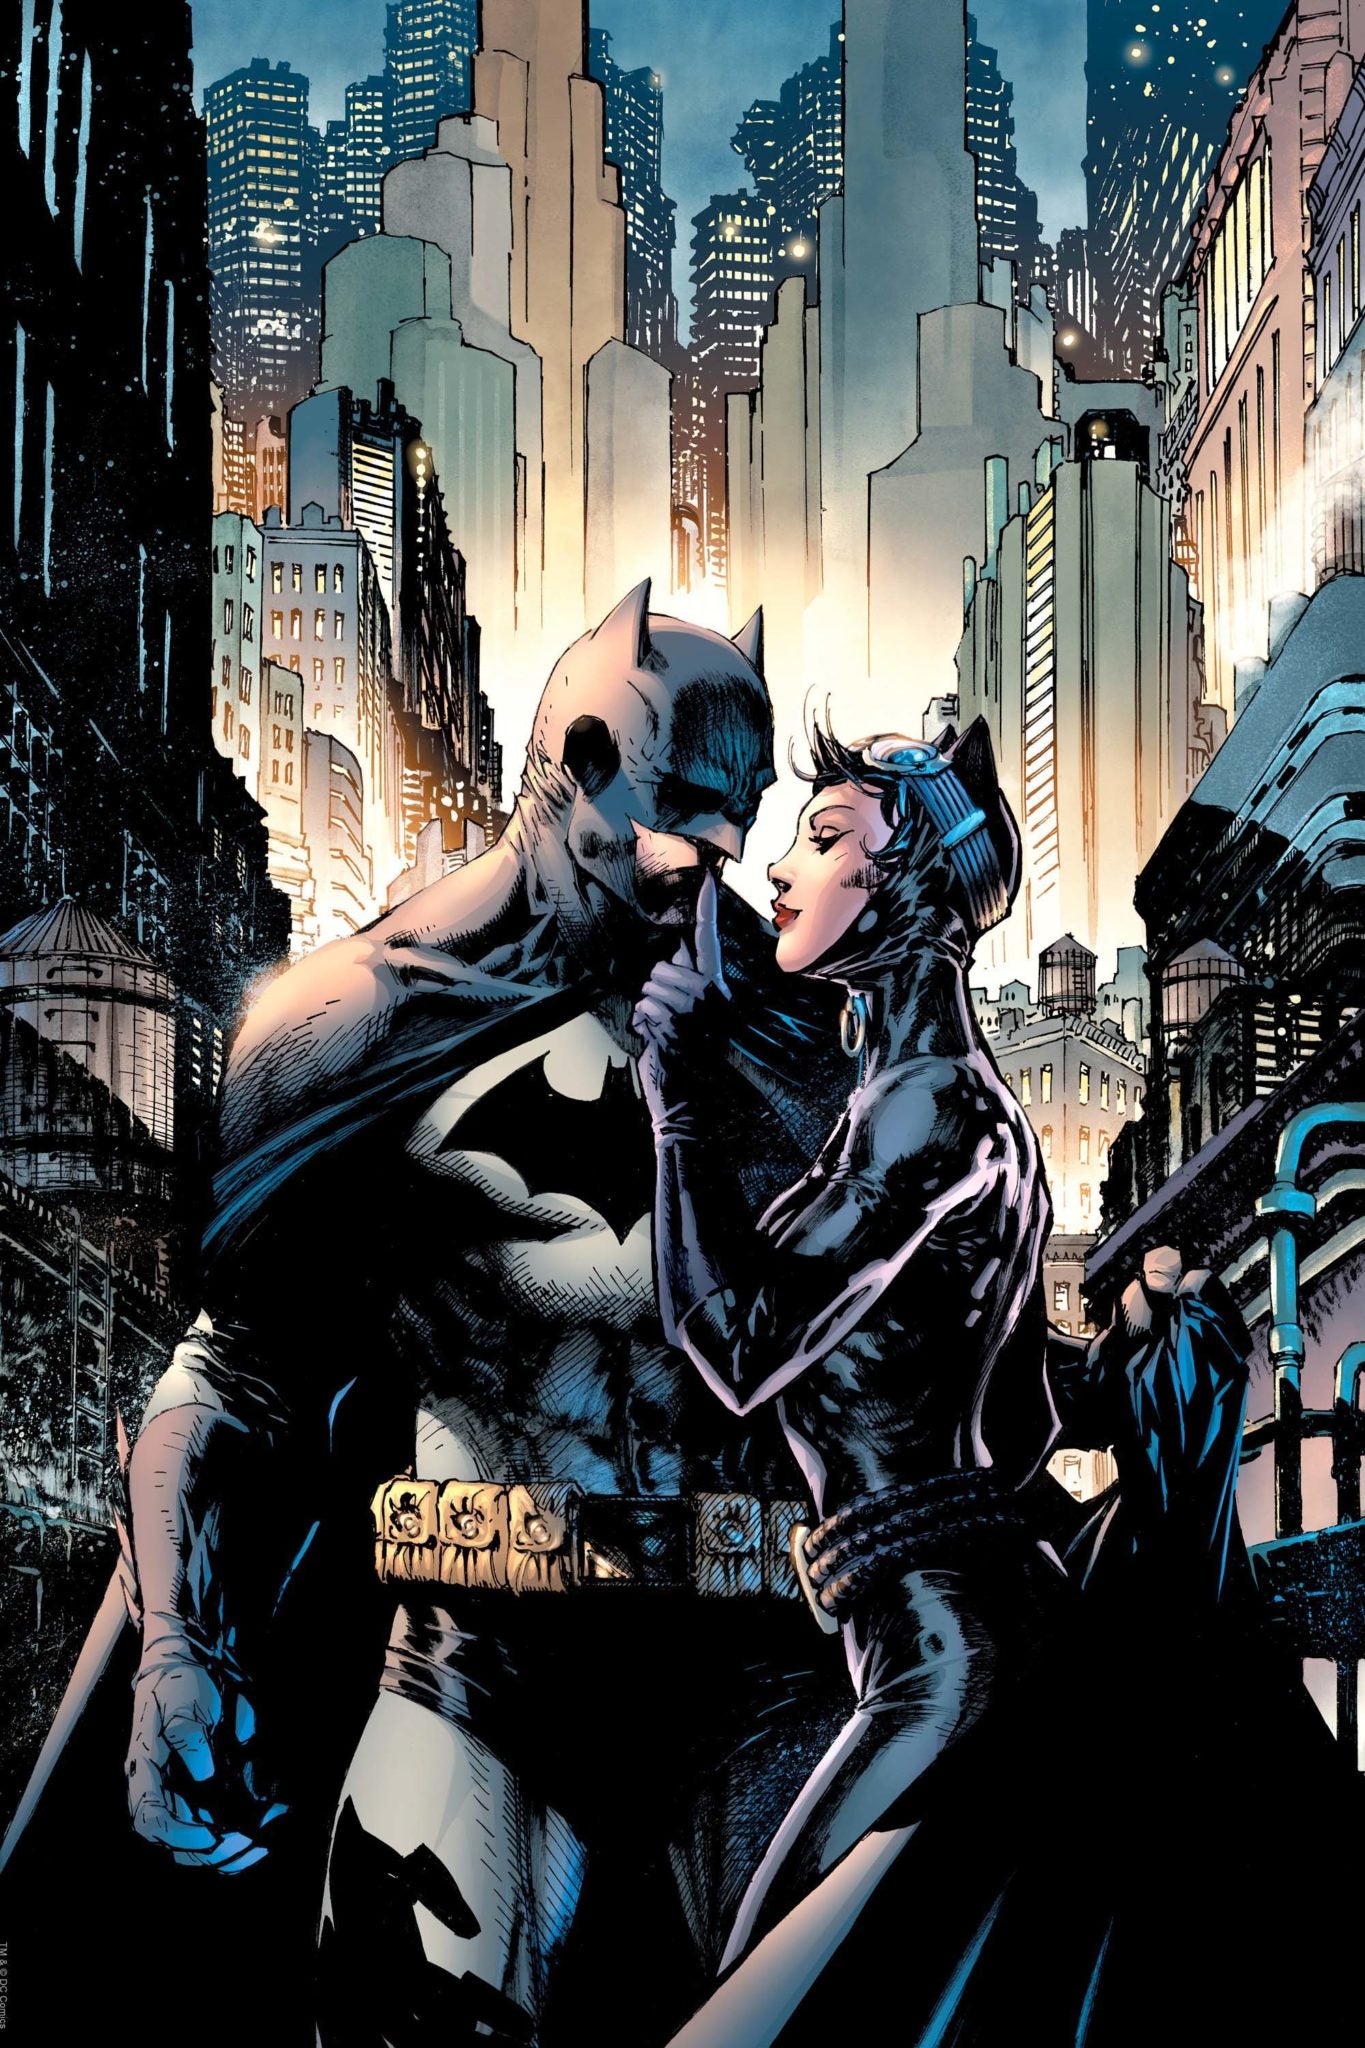 Catwoman has Batman attention as she cuddles right up to him.